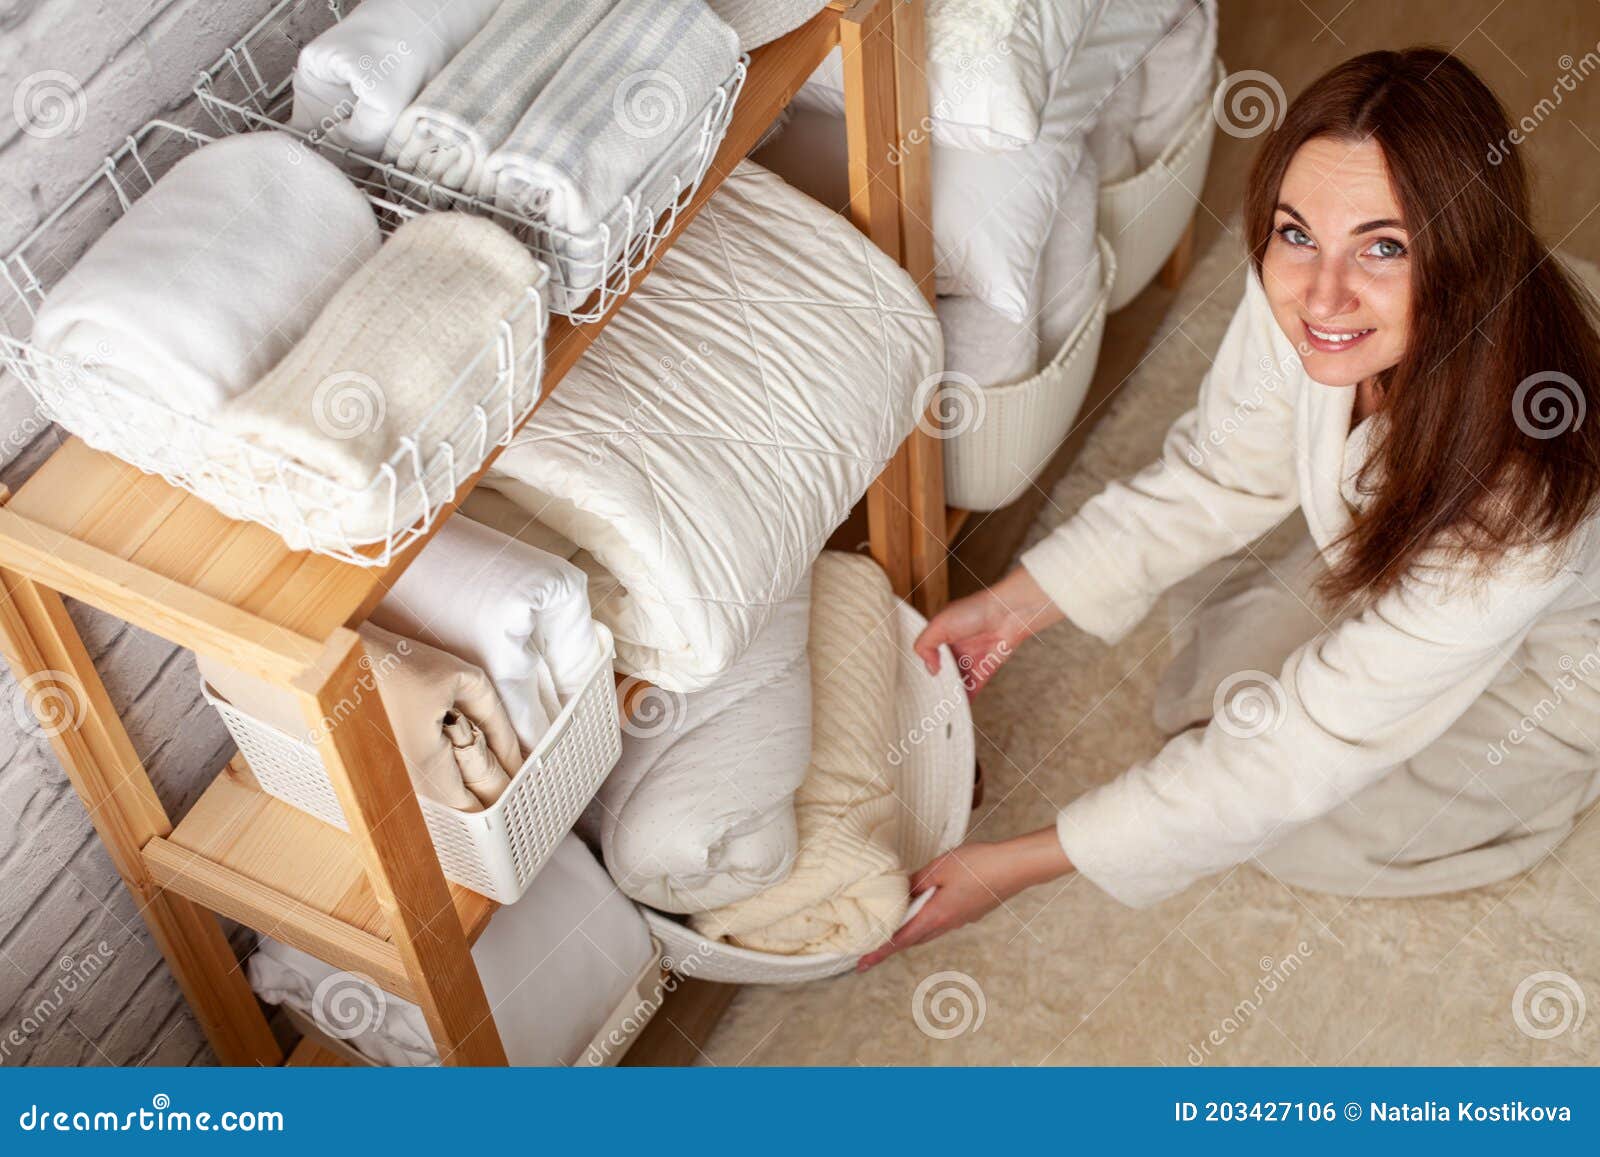 young woman in warm robe is organizing linen closet with neatly folded towels, sheets and blankets.